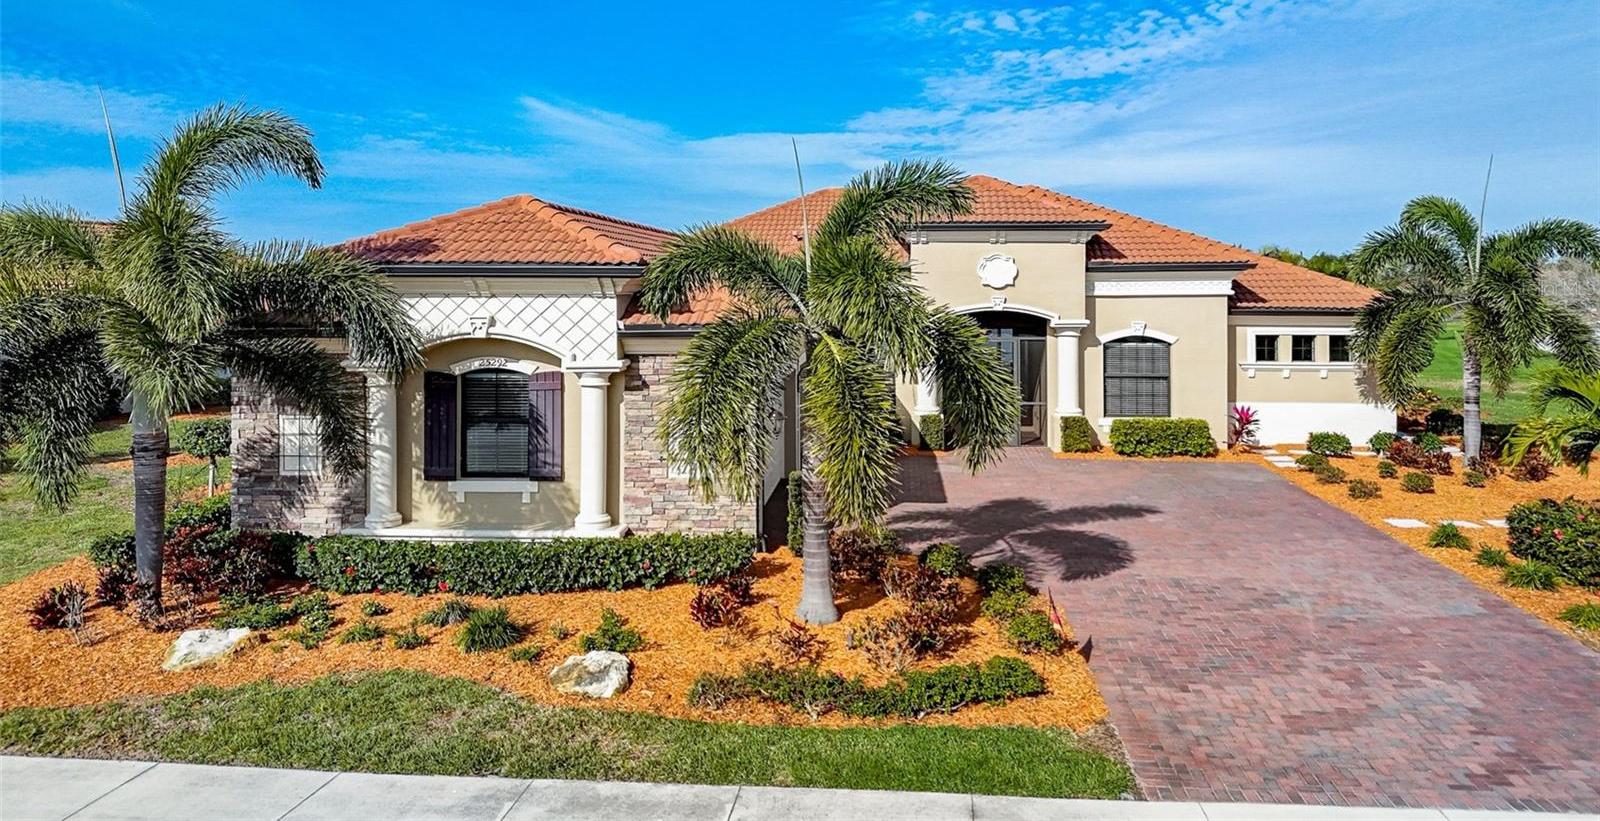 Photo one of 25292 Spartina Dr Venice FL 34293 | MLS A4600400